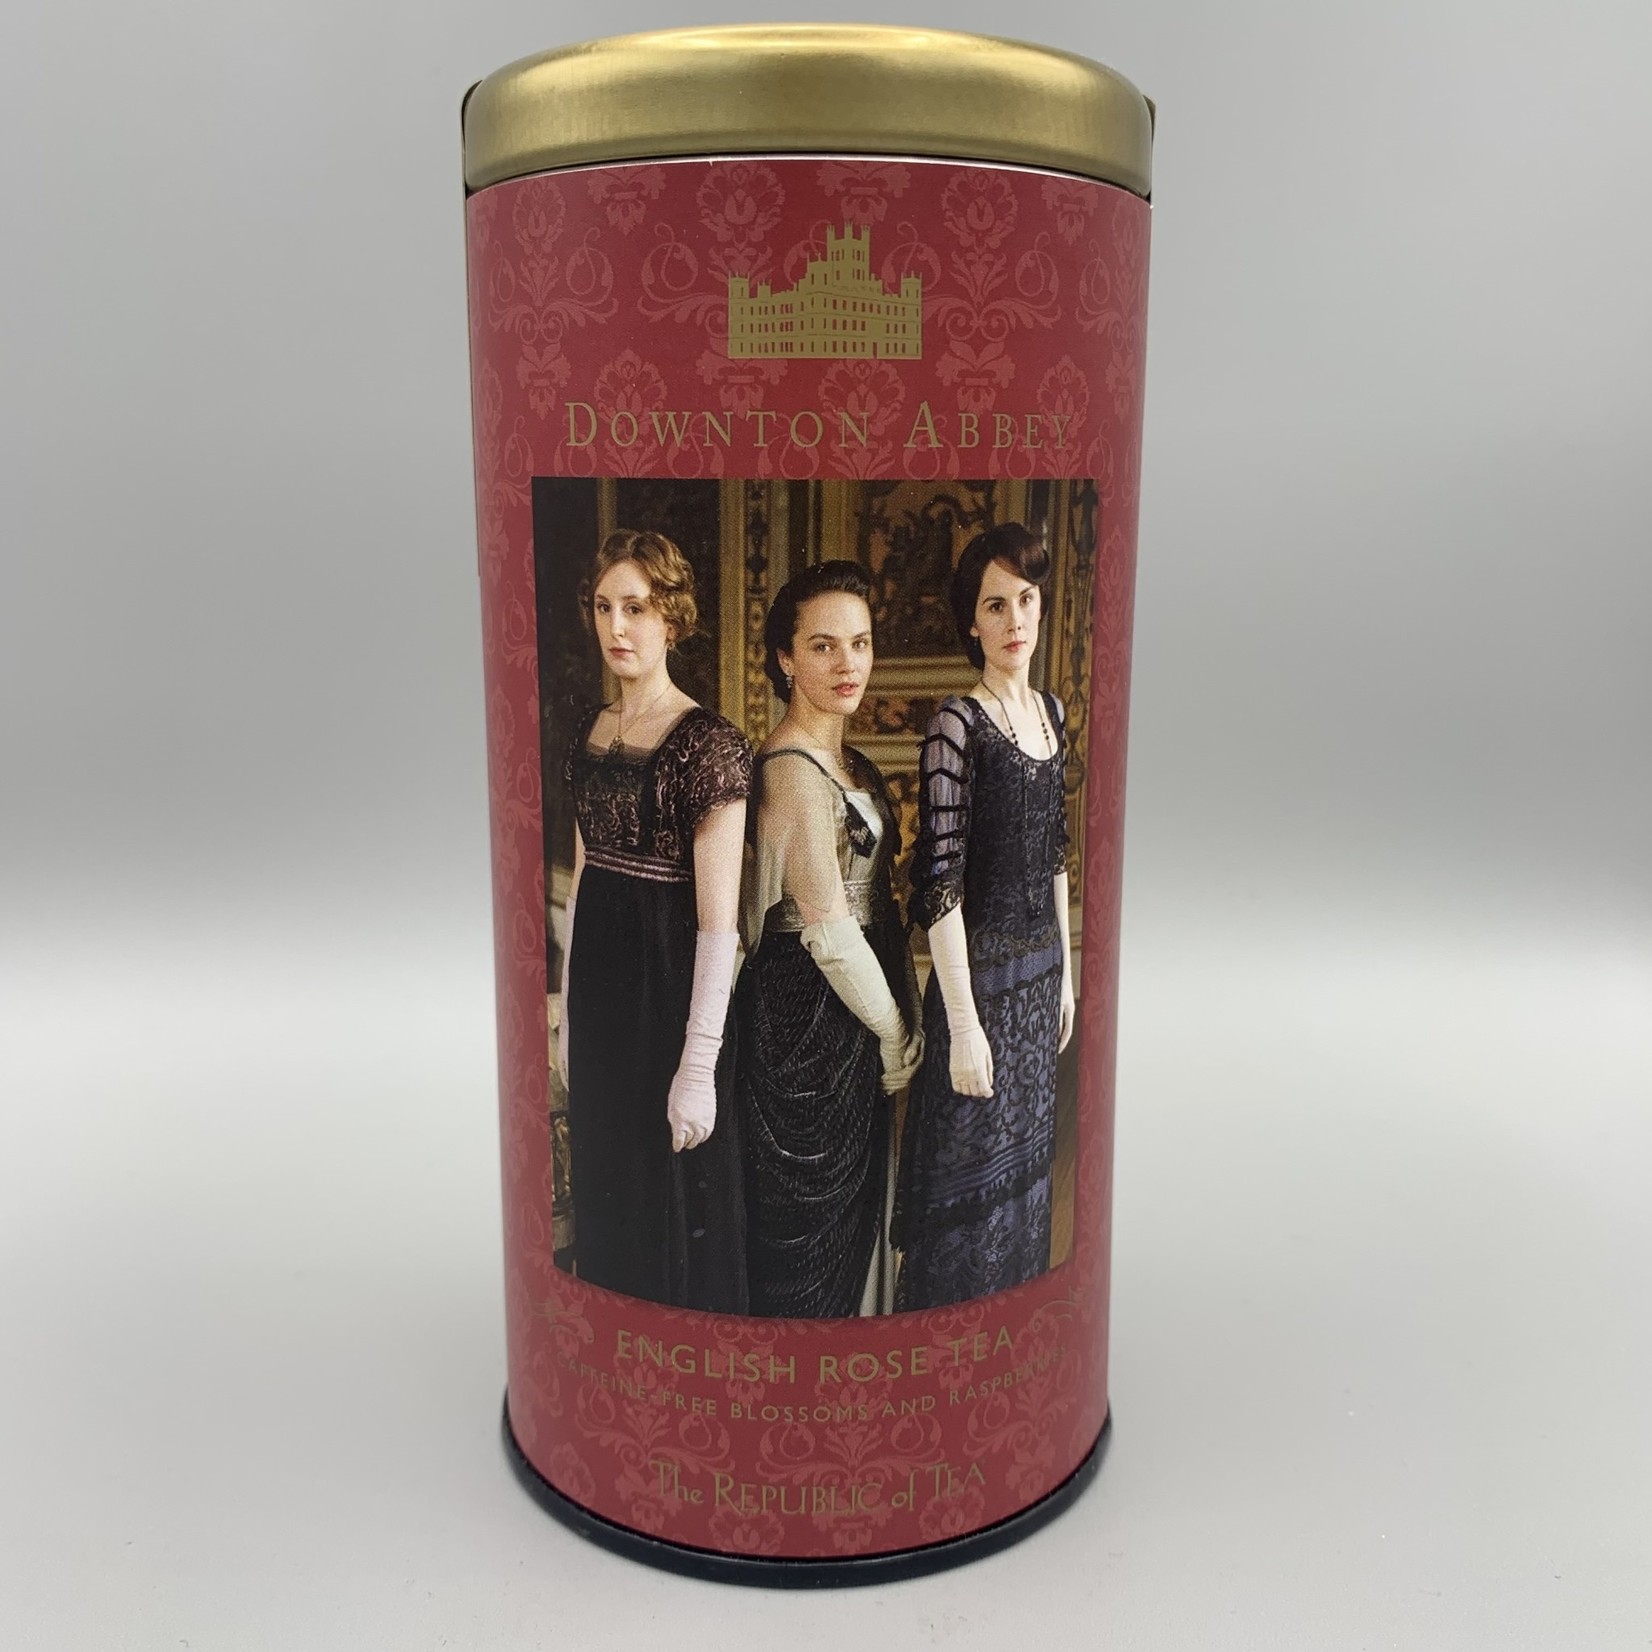 The Republic of Tea: Special Herbal Blend: Downtown Abbey, "English Rose"